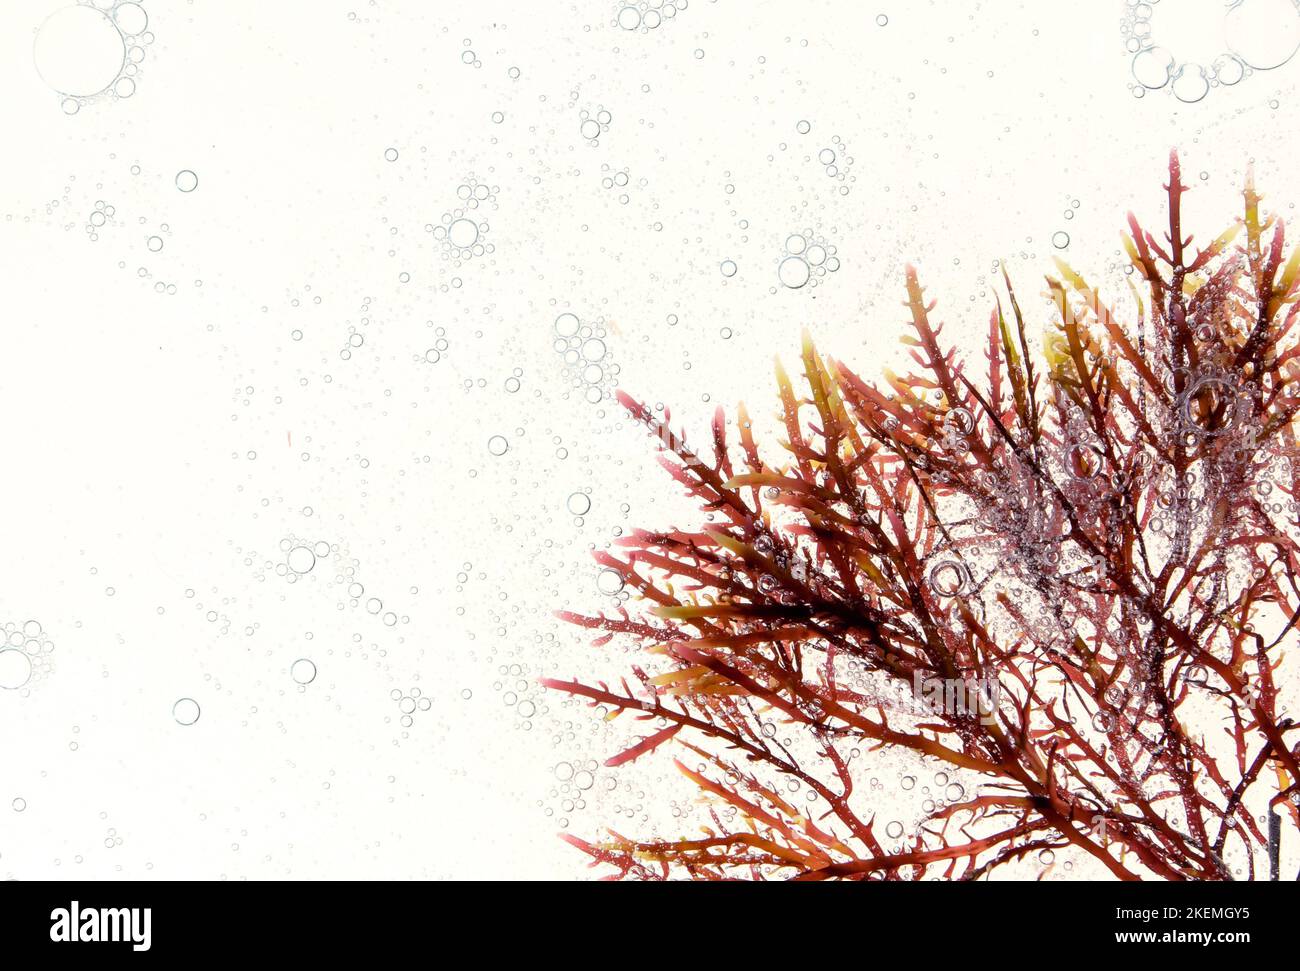 Red algae in the corner and air bubbles in the water. Stock Photo